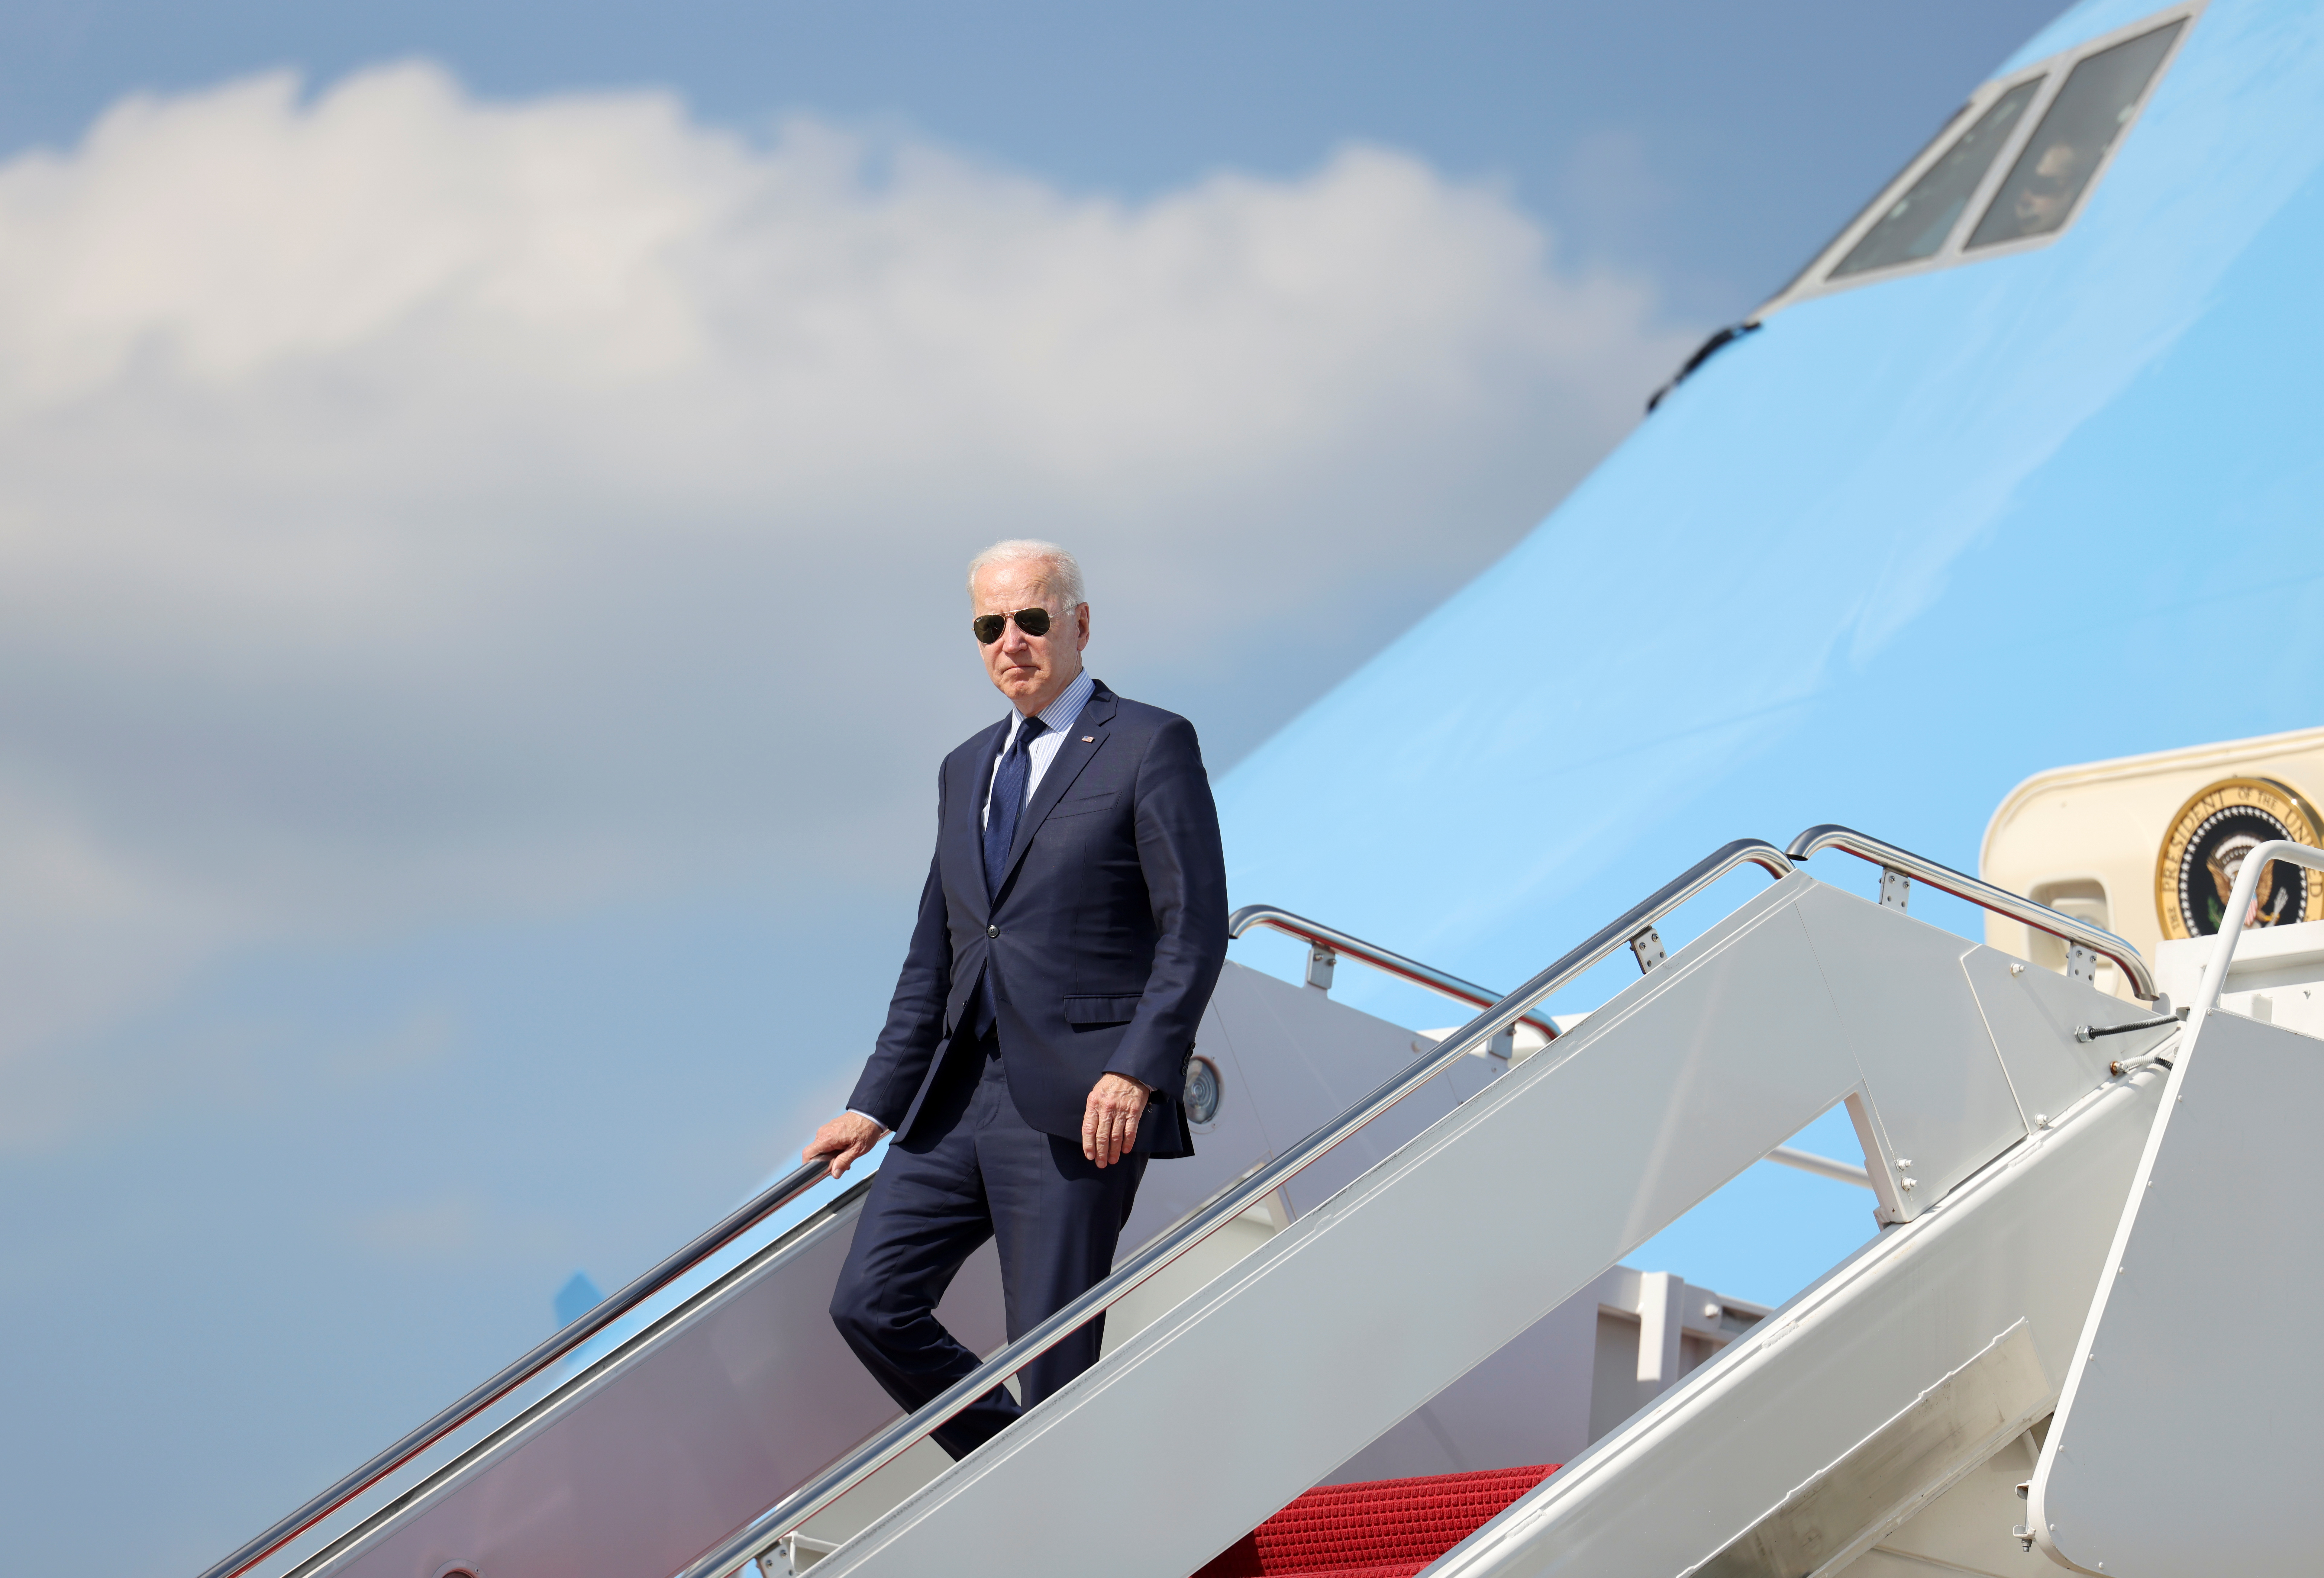 U.S. President Joe Biden disembarks from Air Force One after landing at Joint Base Andrews